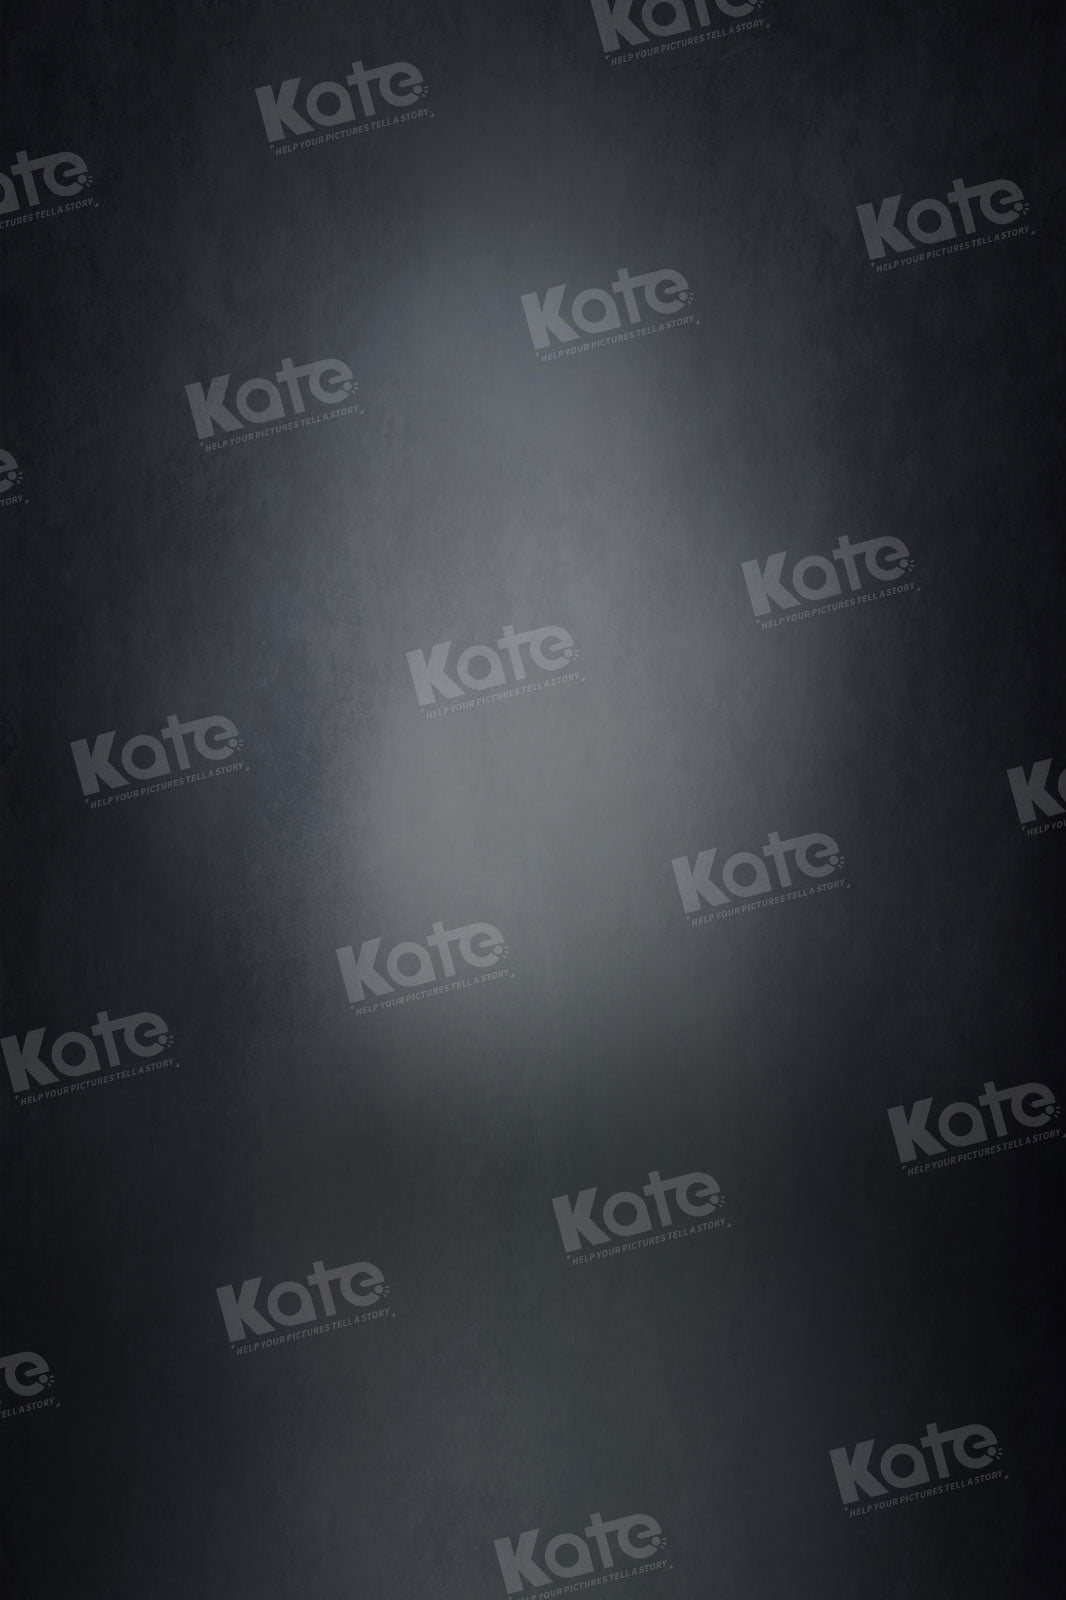 Kate Abstract Light Grey Black Backdrop for Photography